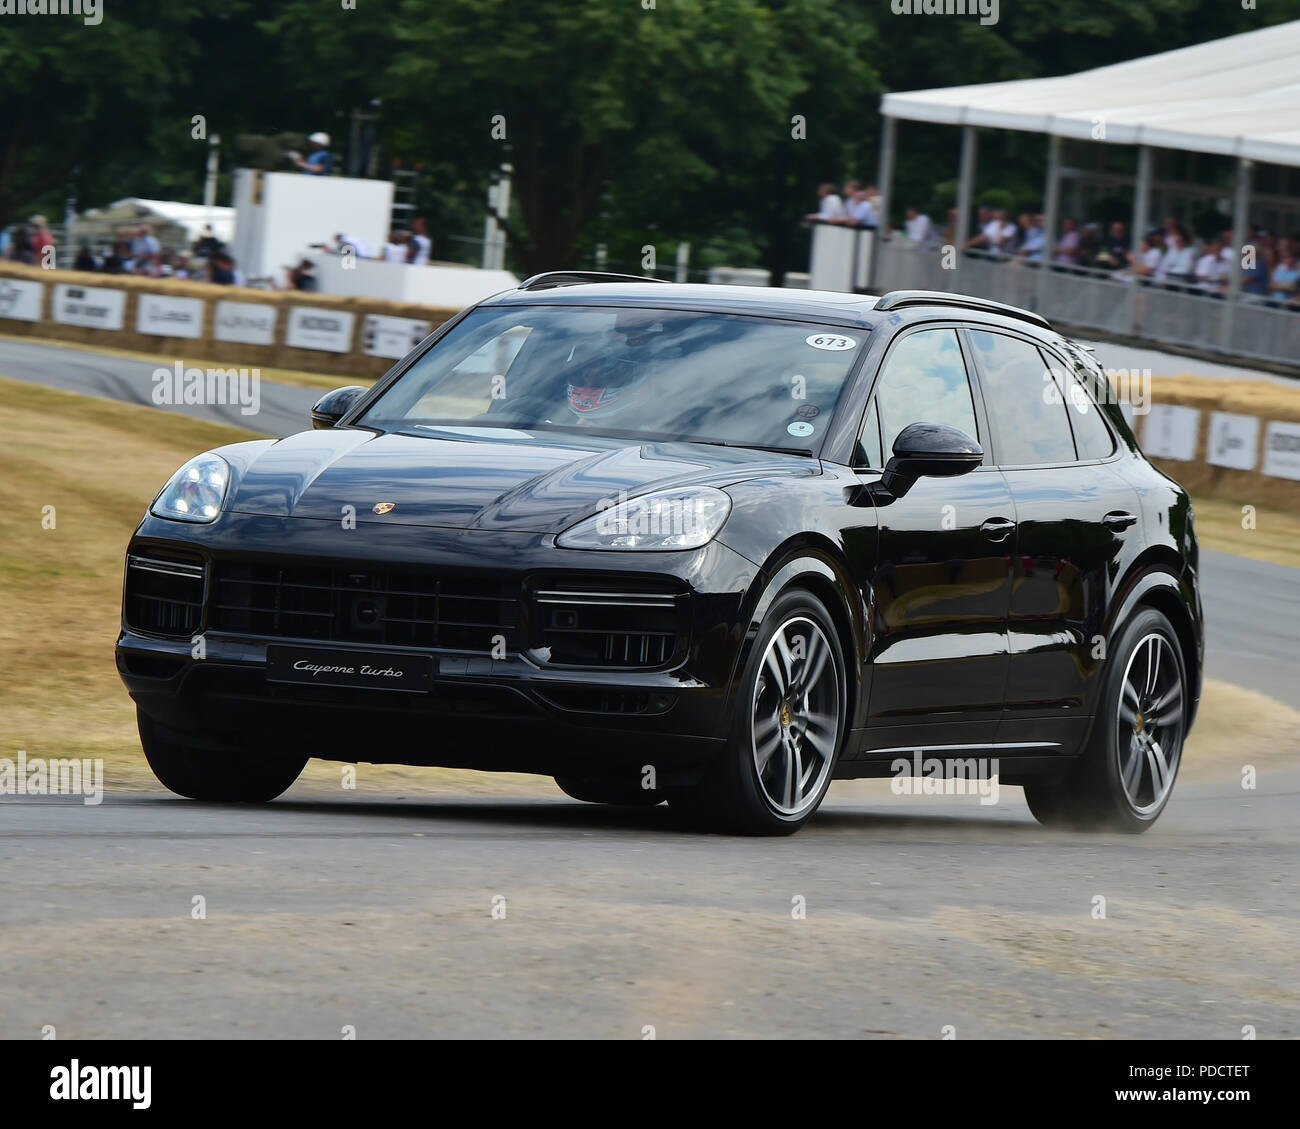 Simon Simpson, Porsche Cayenne Turbo, Michelin Supercar Run, First Glance, Festival of Speed - The Silver Jubilee, Goodwood Festival of Speed, 2018,   Stock Photo